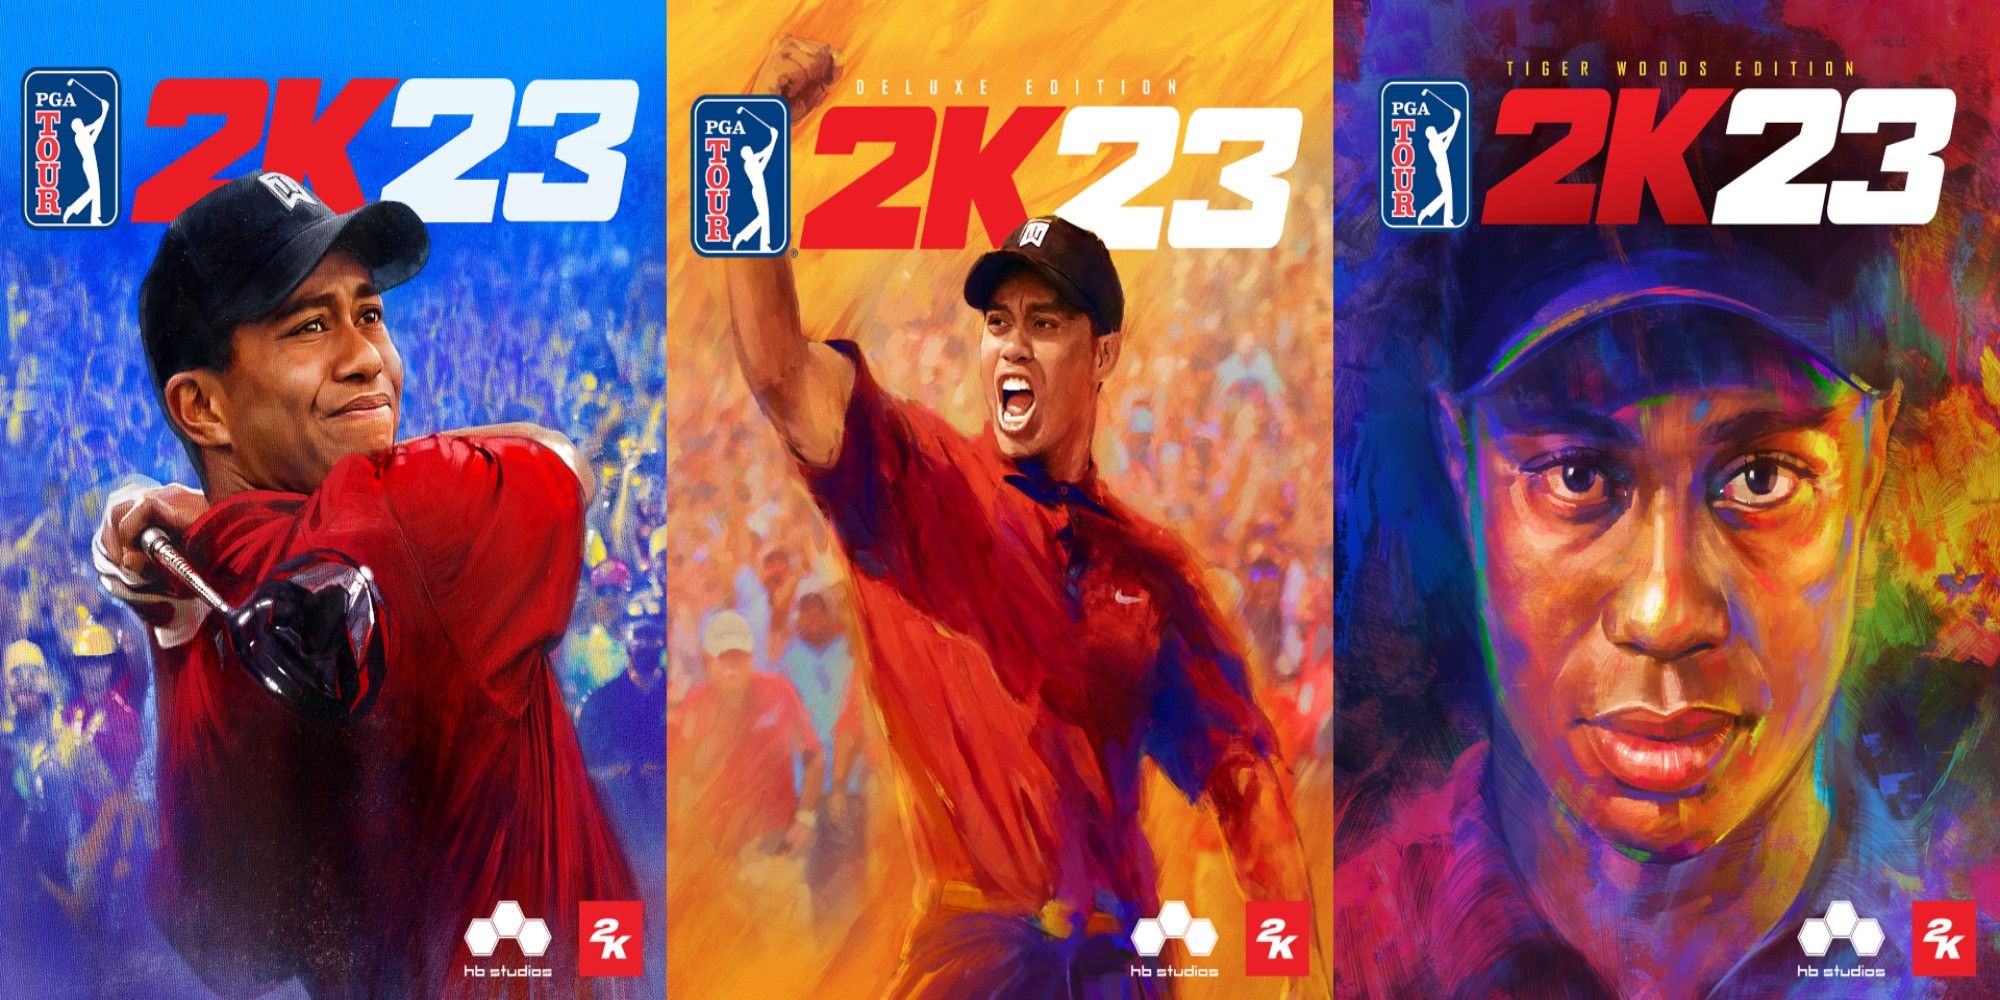 PGA TOUR 2K23 Tiger Woods special covers.